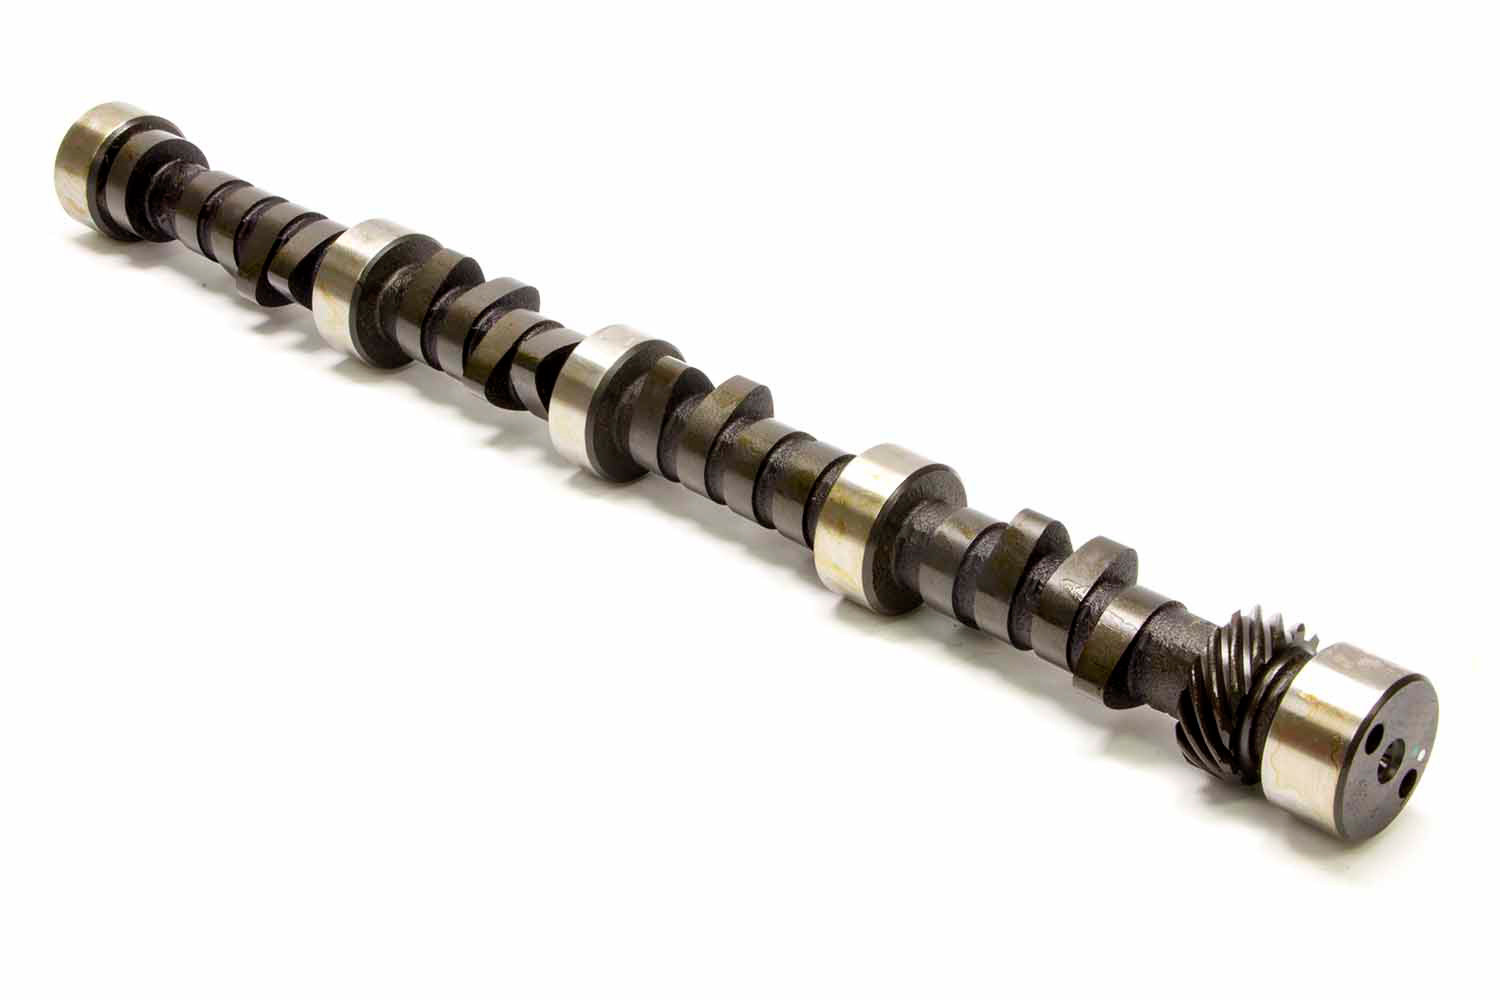 Lunati Cams 10120702 Camshaft, Voodoo, Hydraulic Flat Tappet, Lift 0.468 / 0.489 in, Duration 262 / 268, 112 LSA, 1400 / 5800 RPM, Small Block Chevy, Each